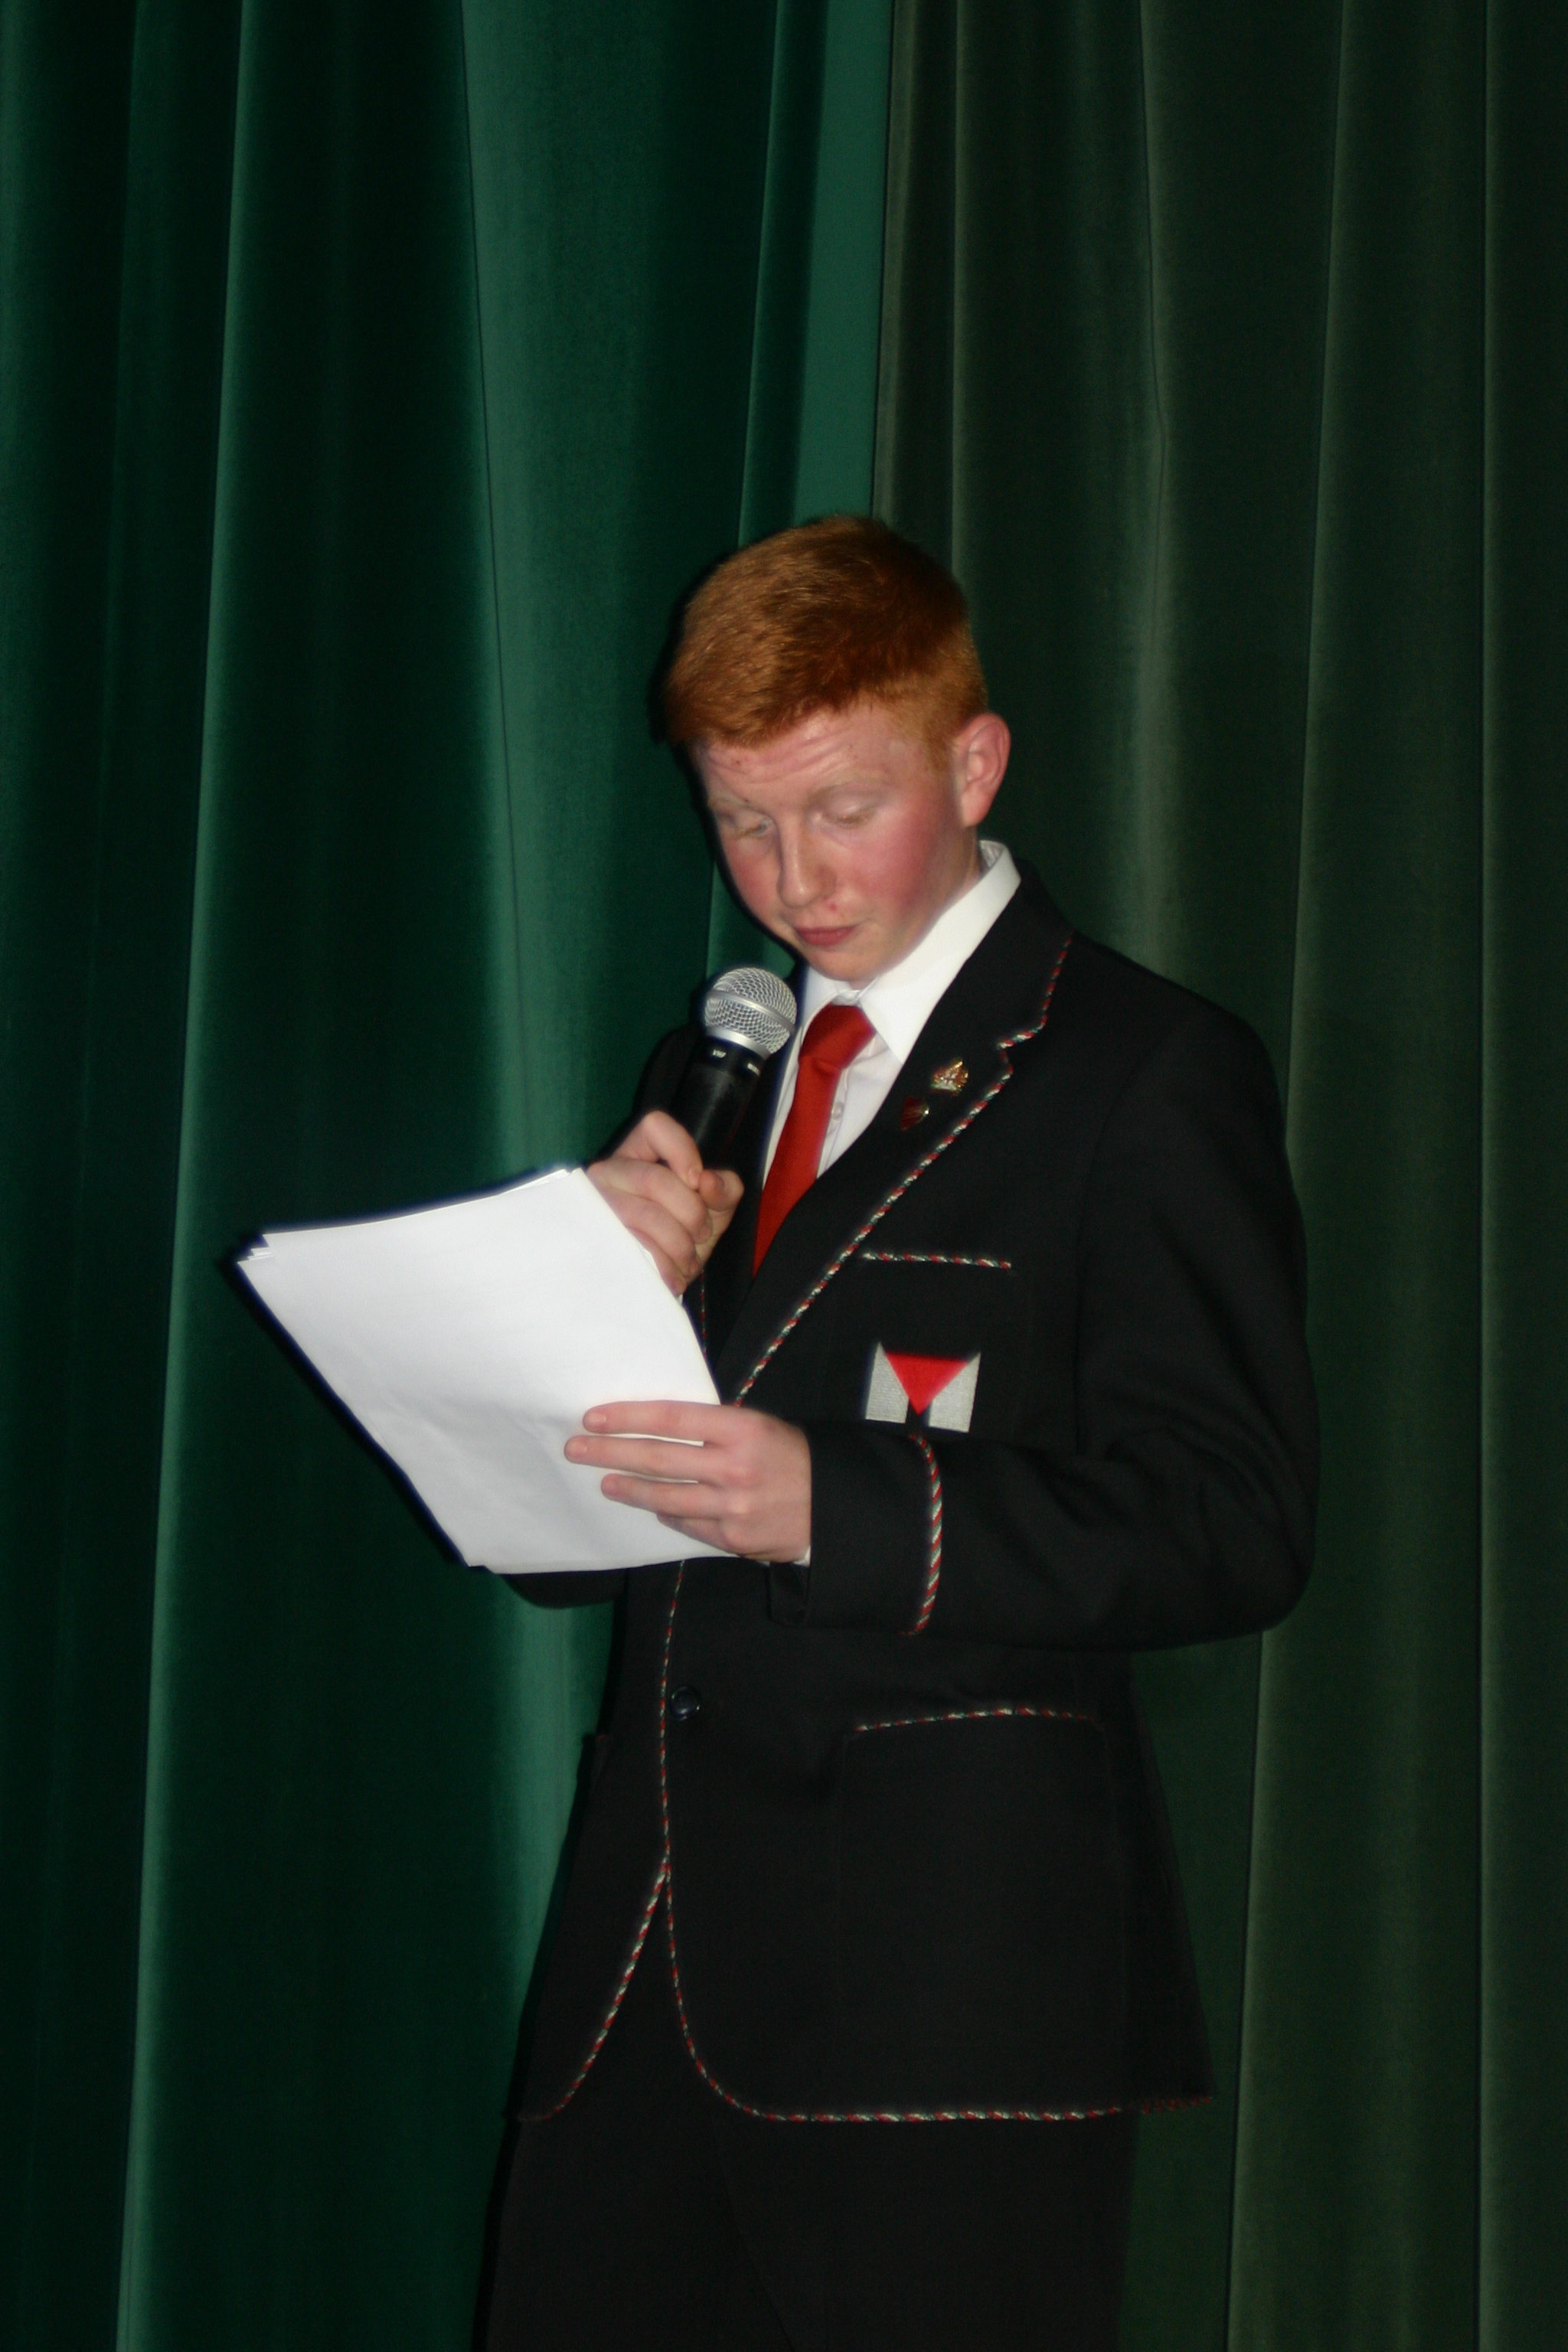 Ross - compere 2